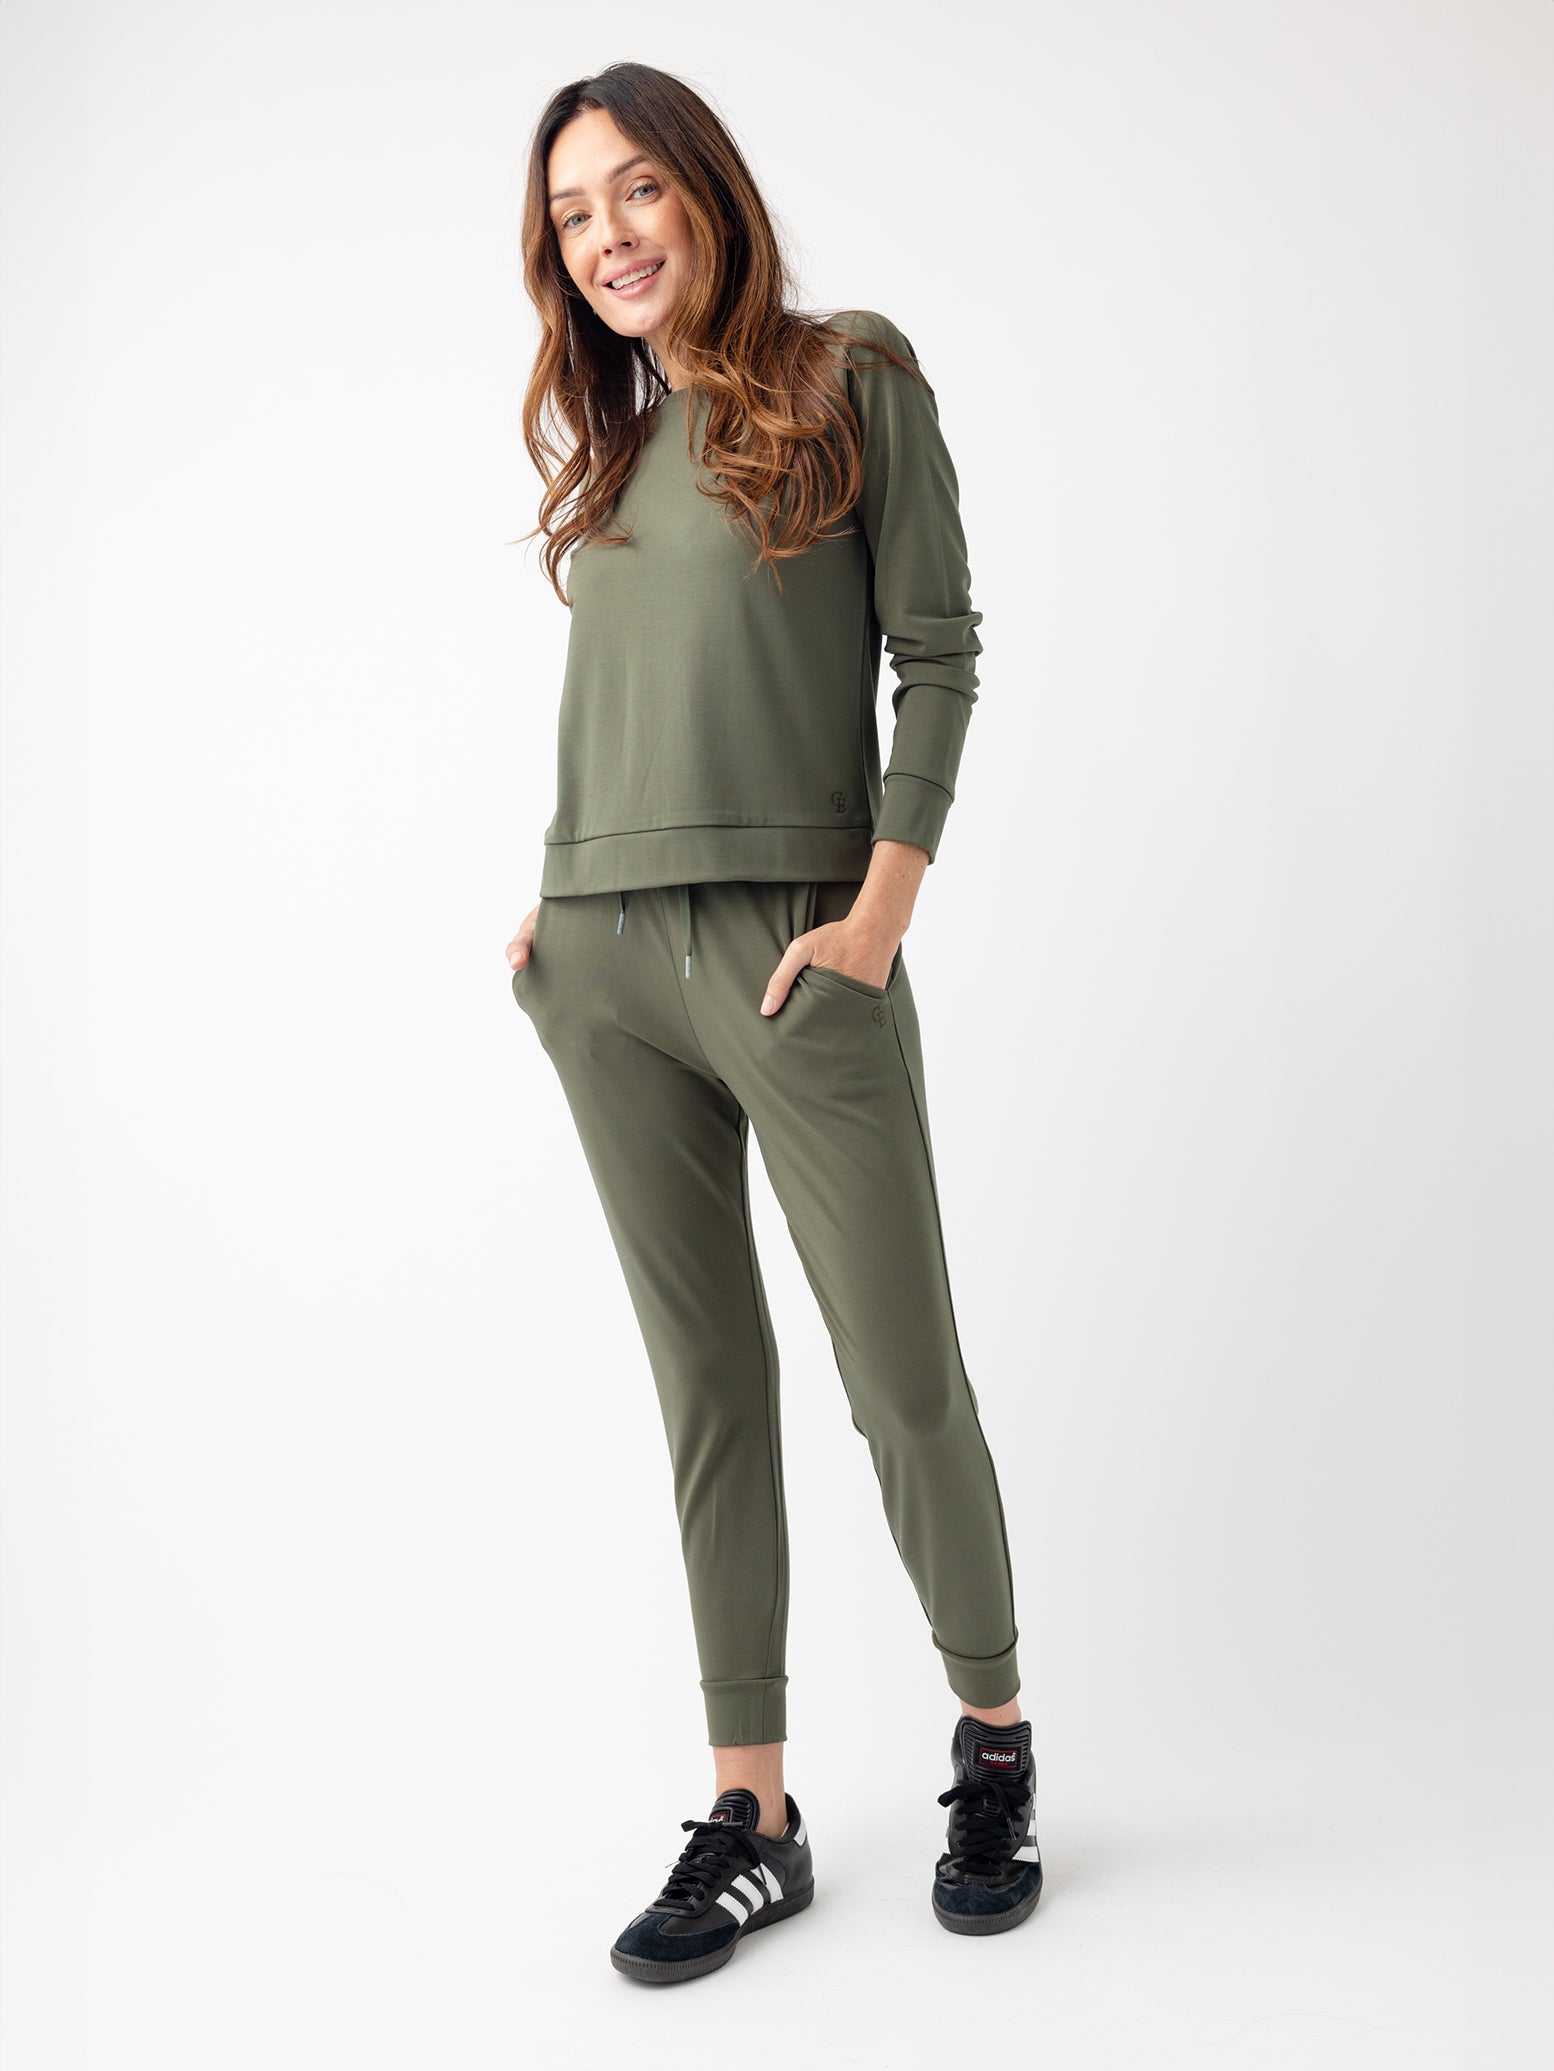 Woman in olive jogger set with white background 